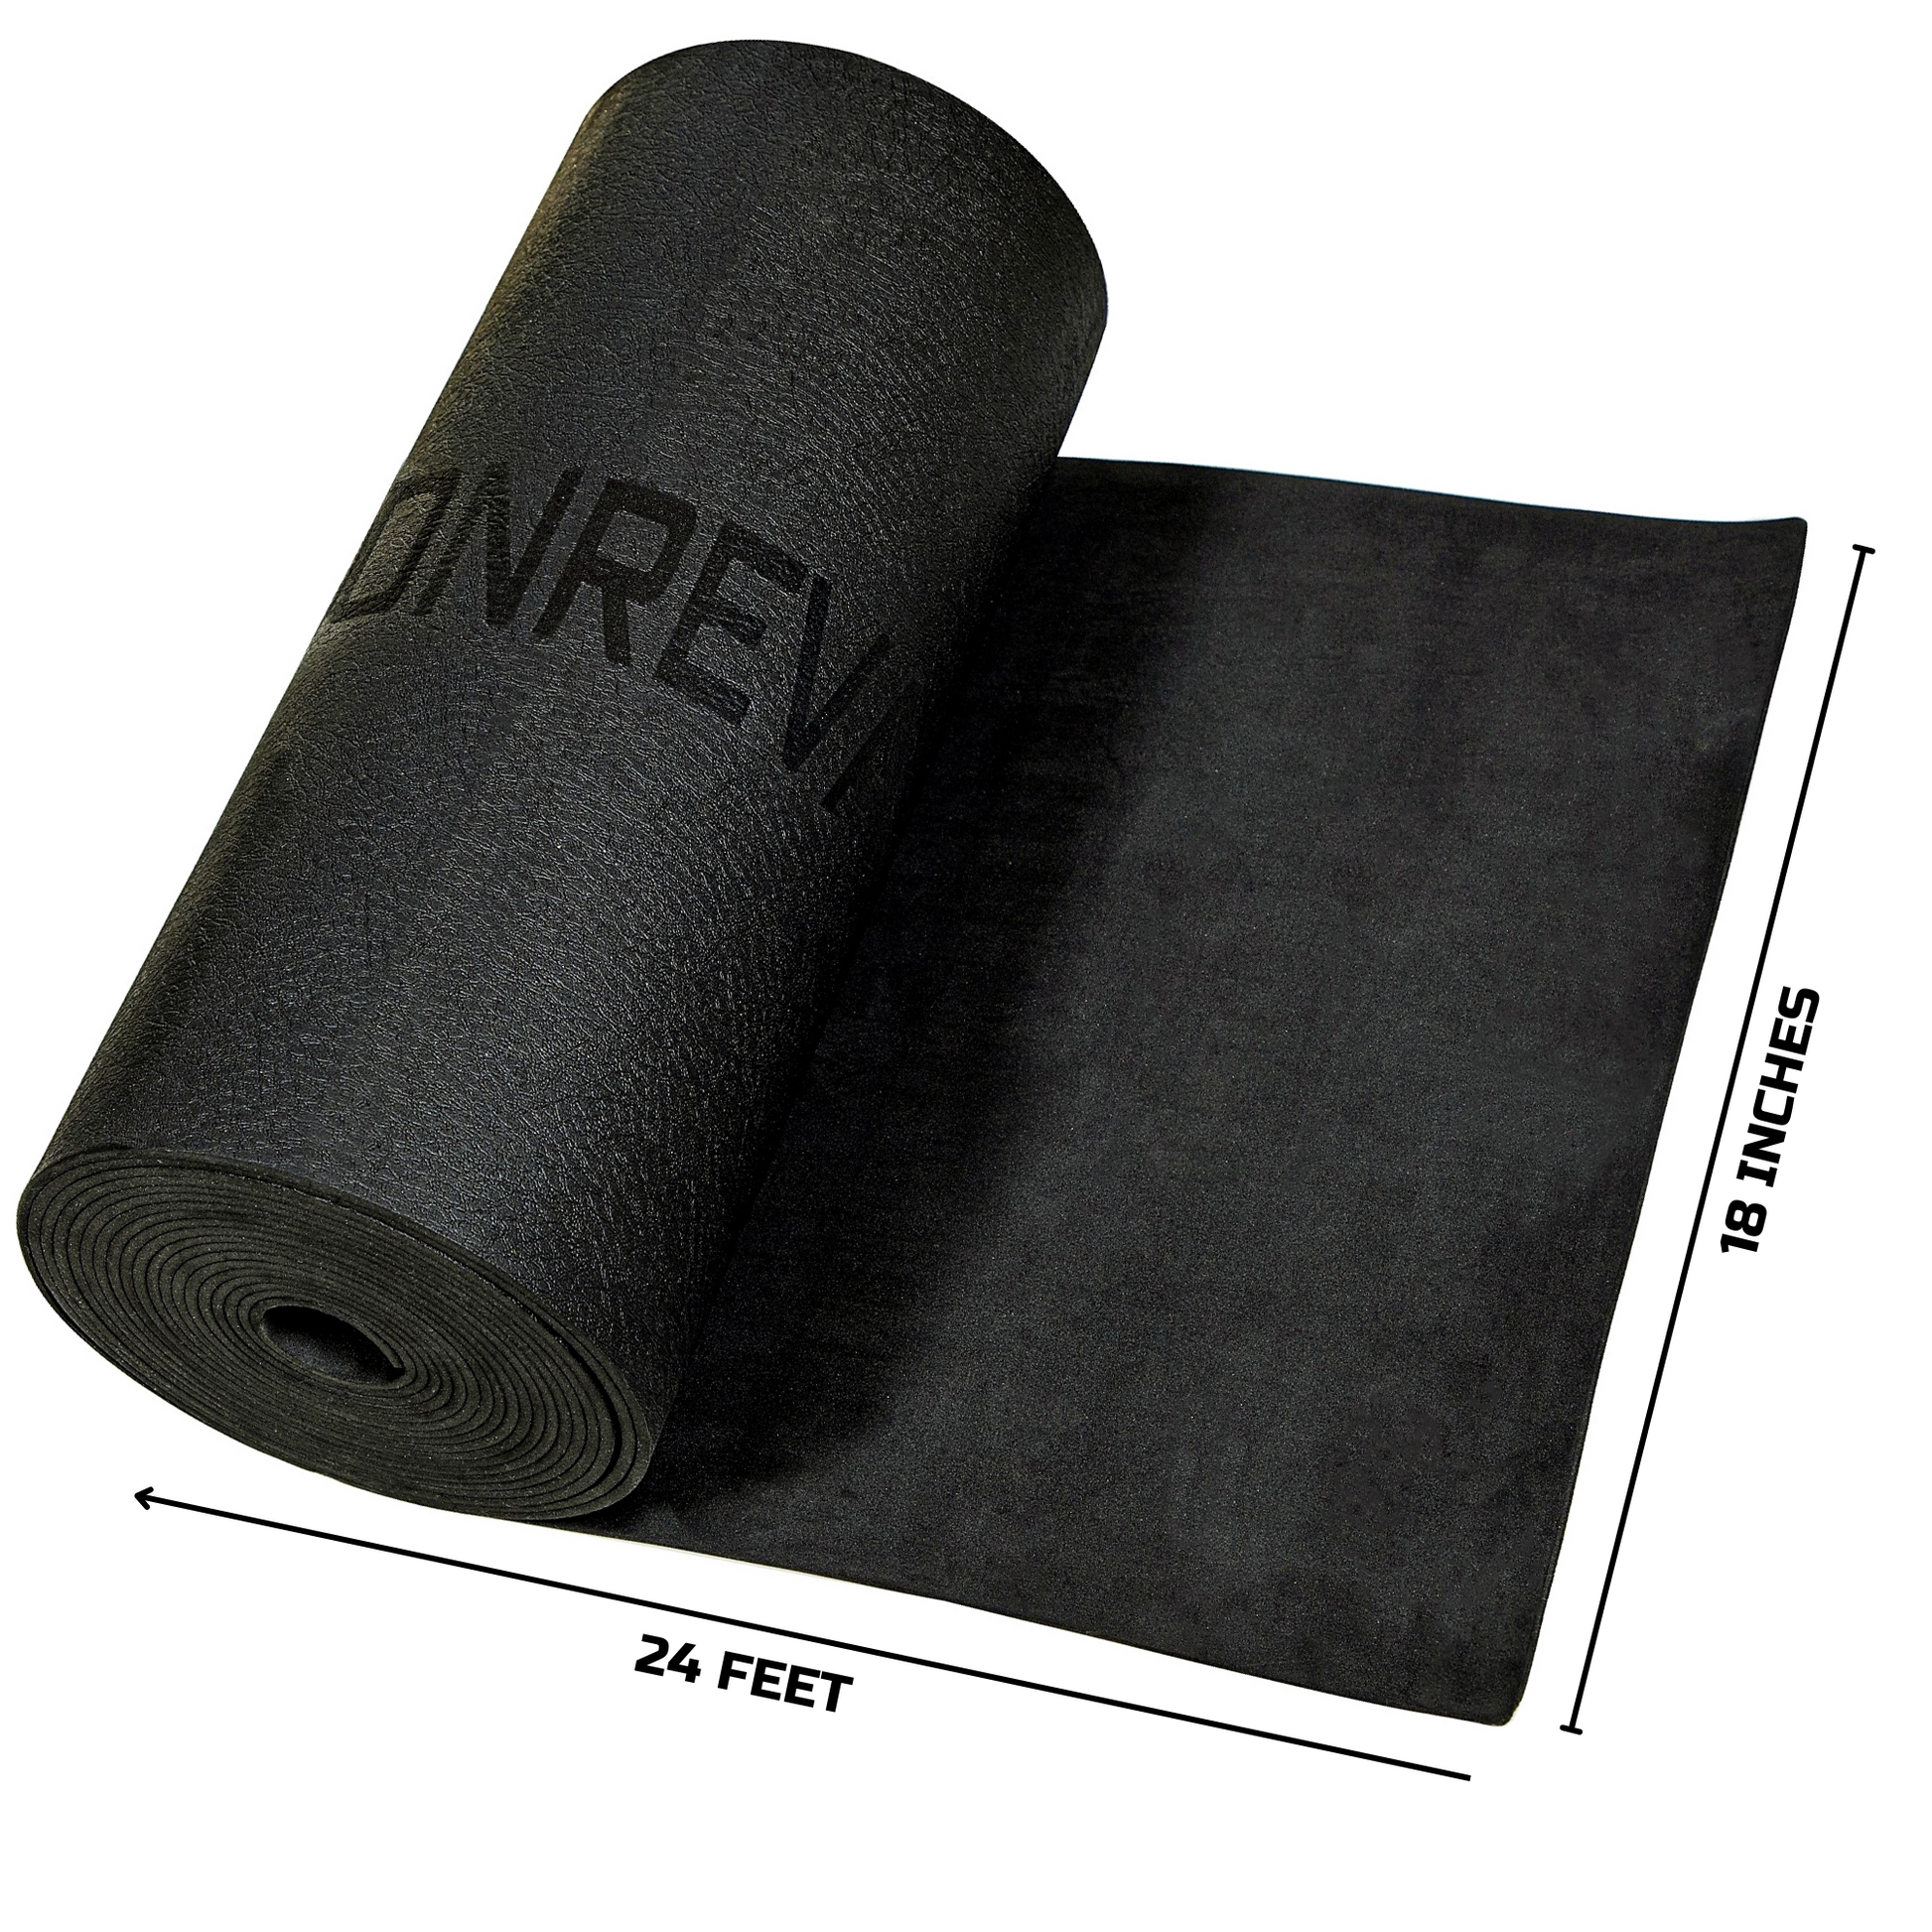 ONREVA Tool Box Liner 18 inch wide x 24 ft Large, Thick Heavy Duty Too